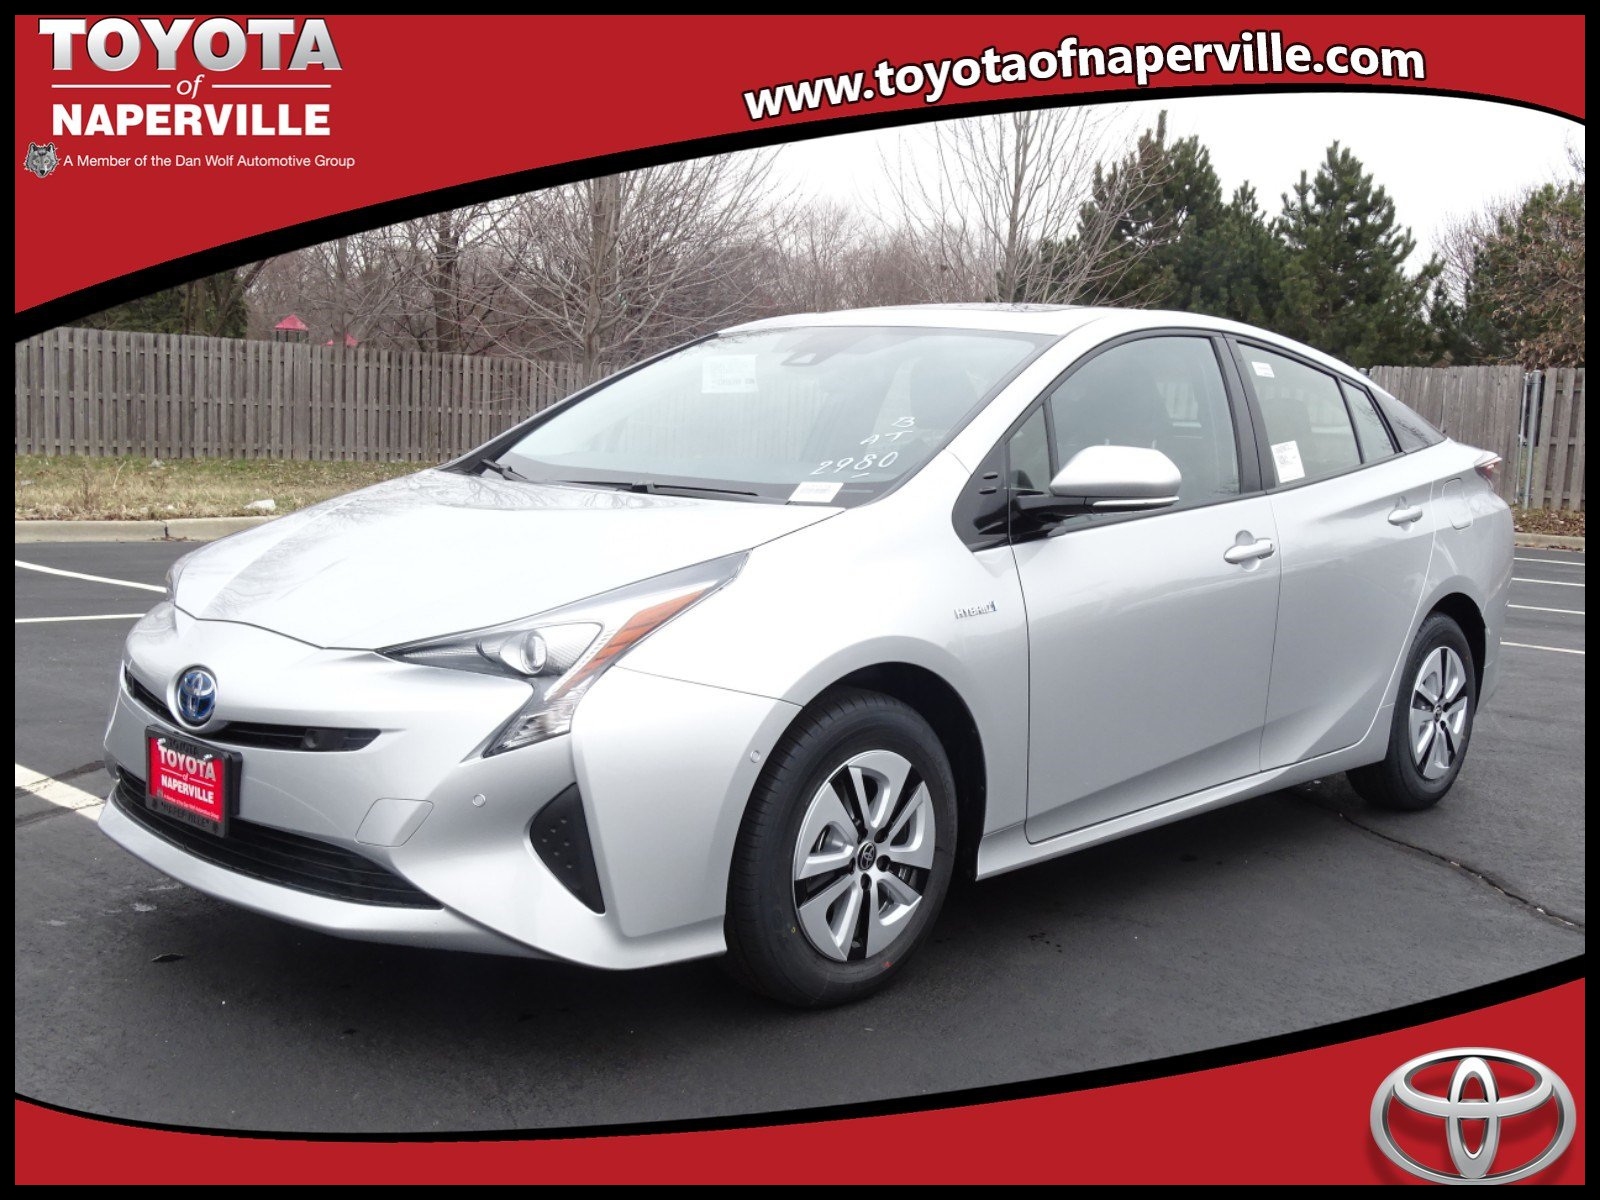 Special New 2018 toyota Prius Four 5d Hatchback In Naperville C Overview and Price